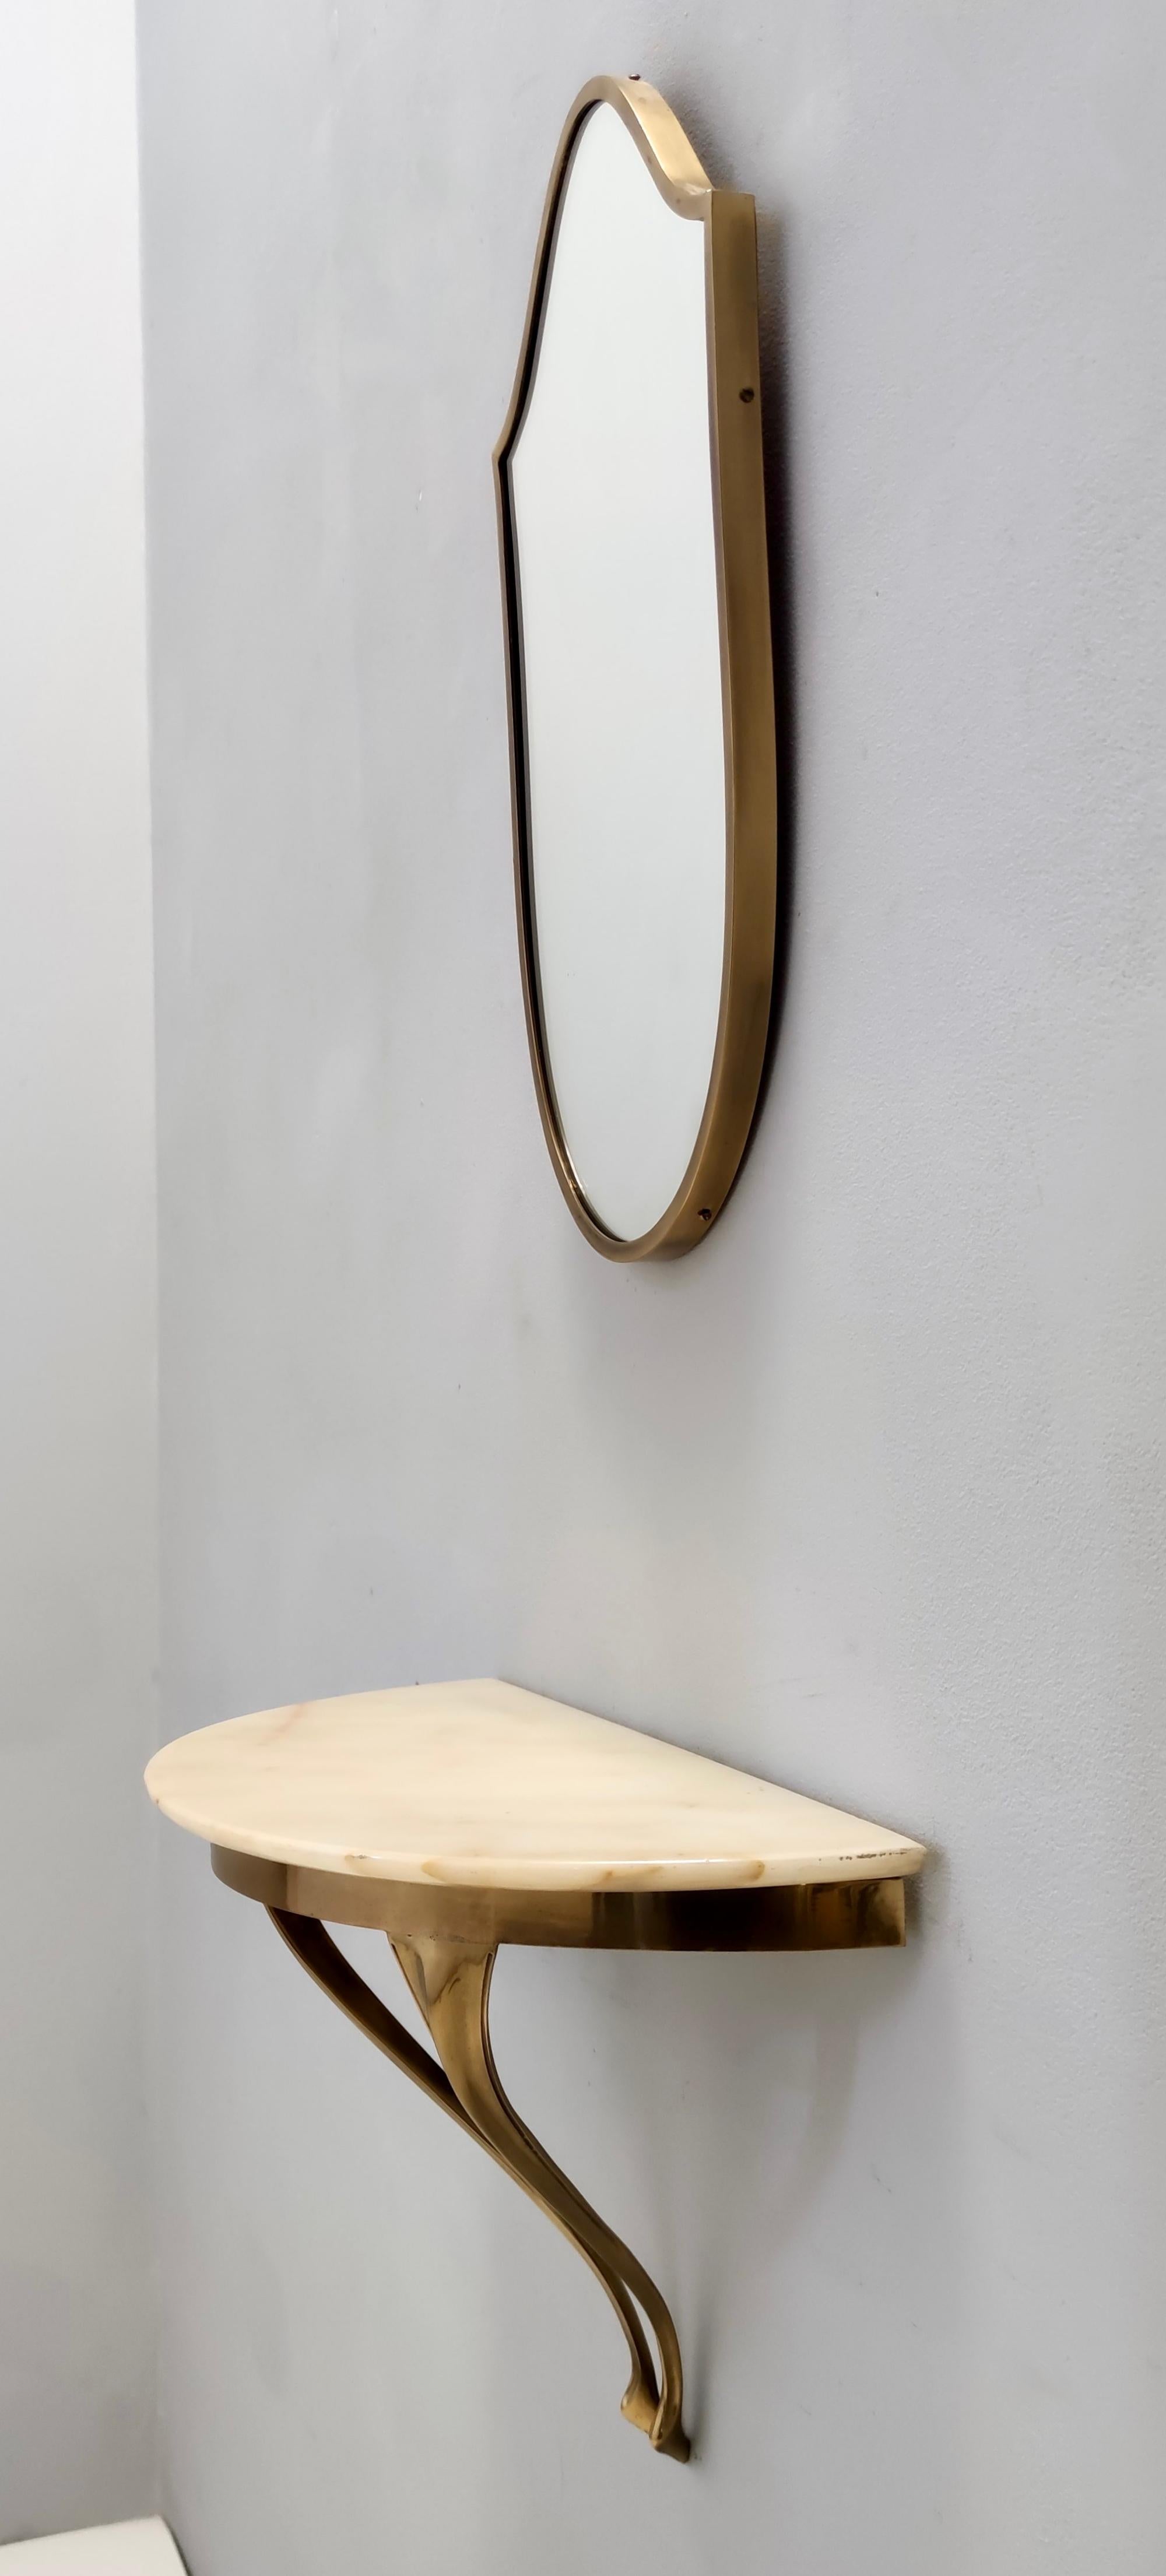 Mid-20th Century Vintage Shield Wall Mirror and a Wall-Mounted Console with a Marble Top, Italy